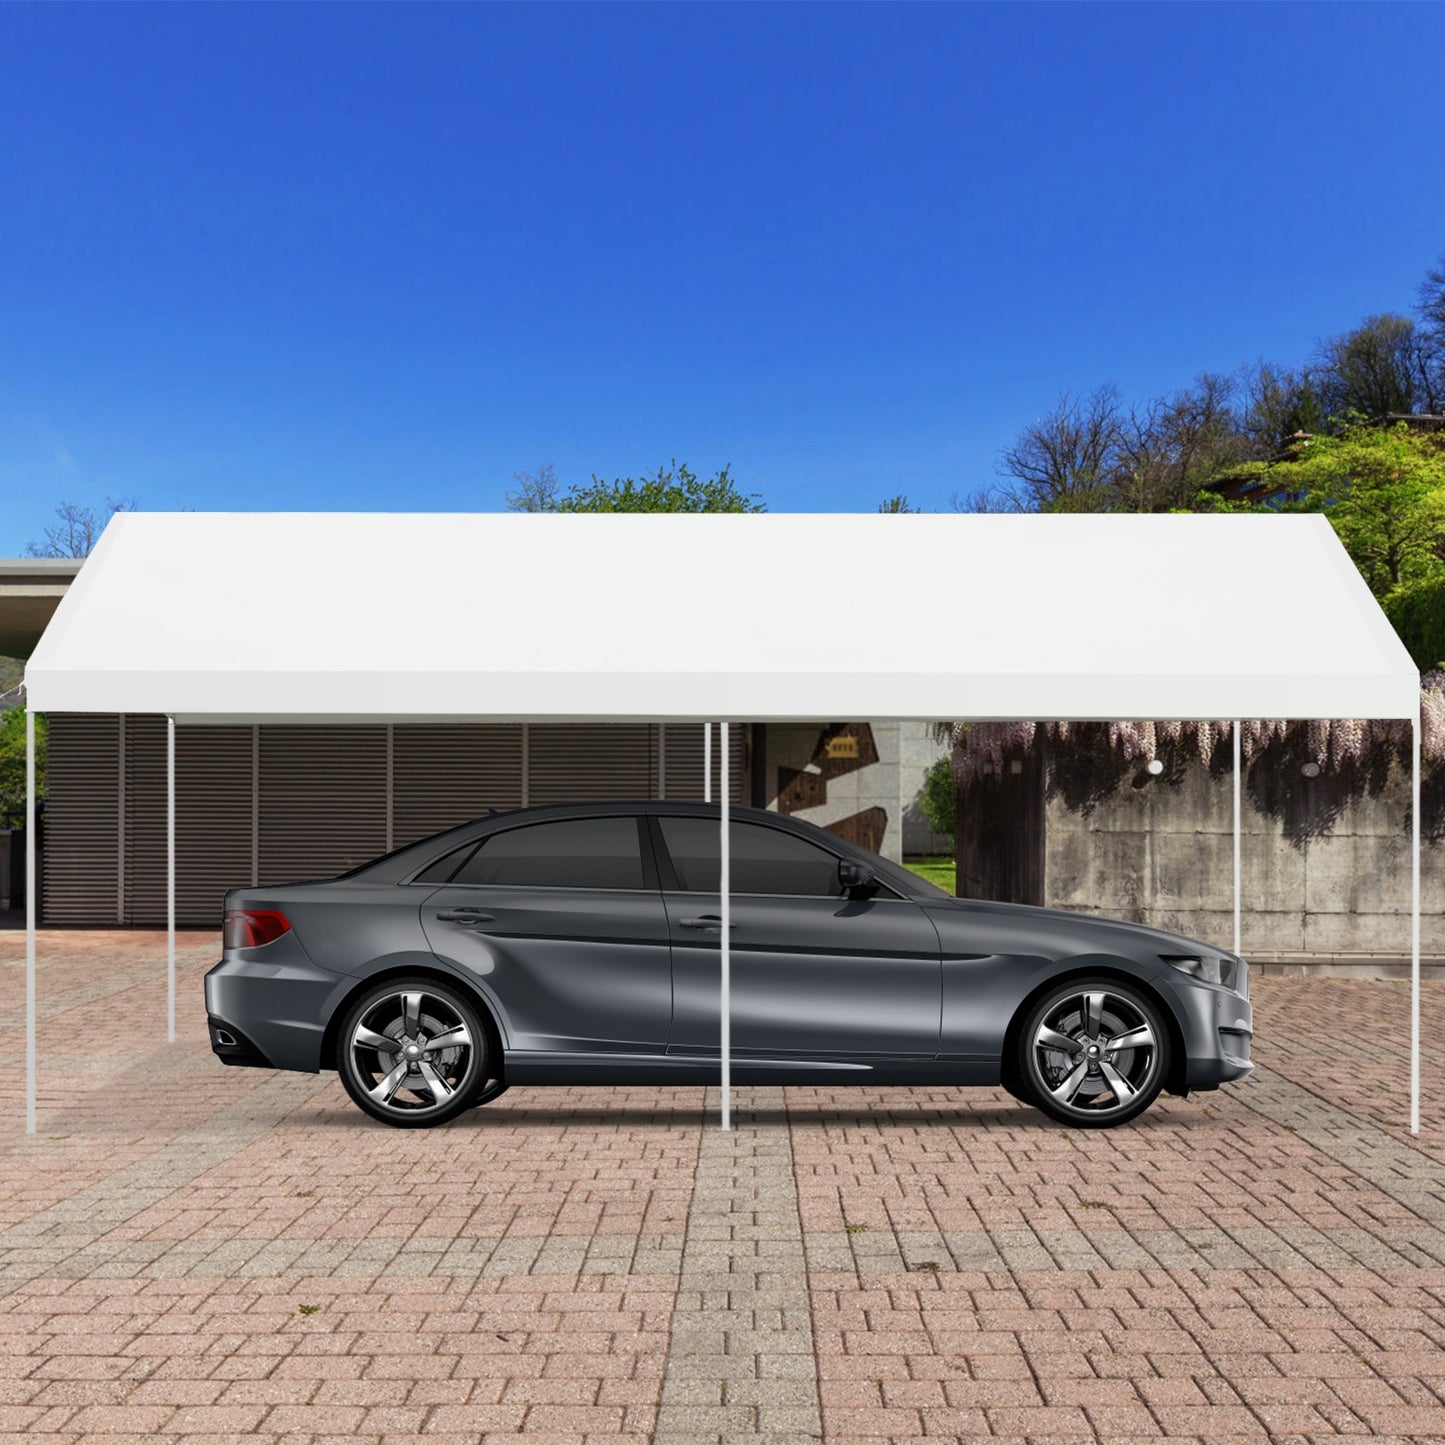 10 x 20 Feet Steel Frame Portable Car Canopy Shelter - Direct by Wilsons Home Store